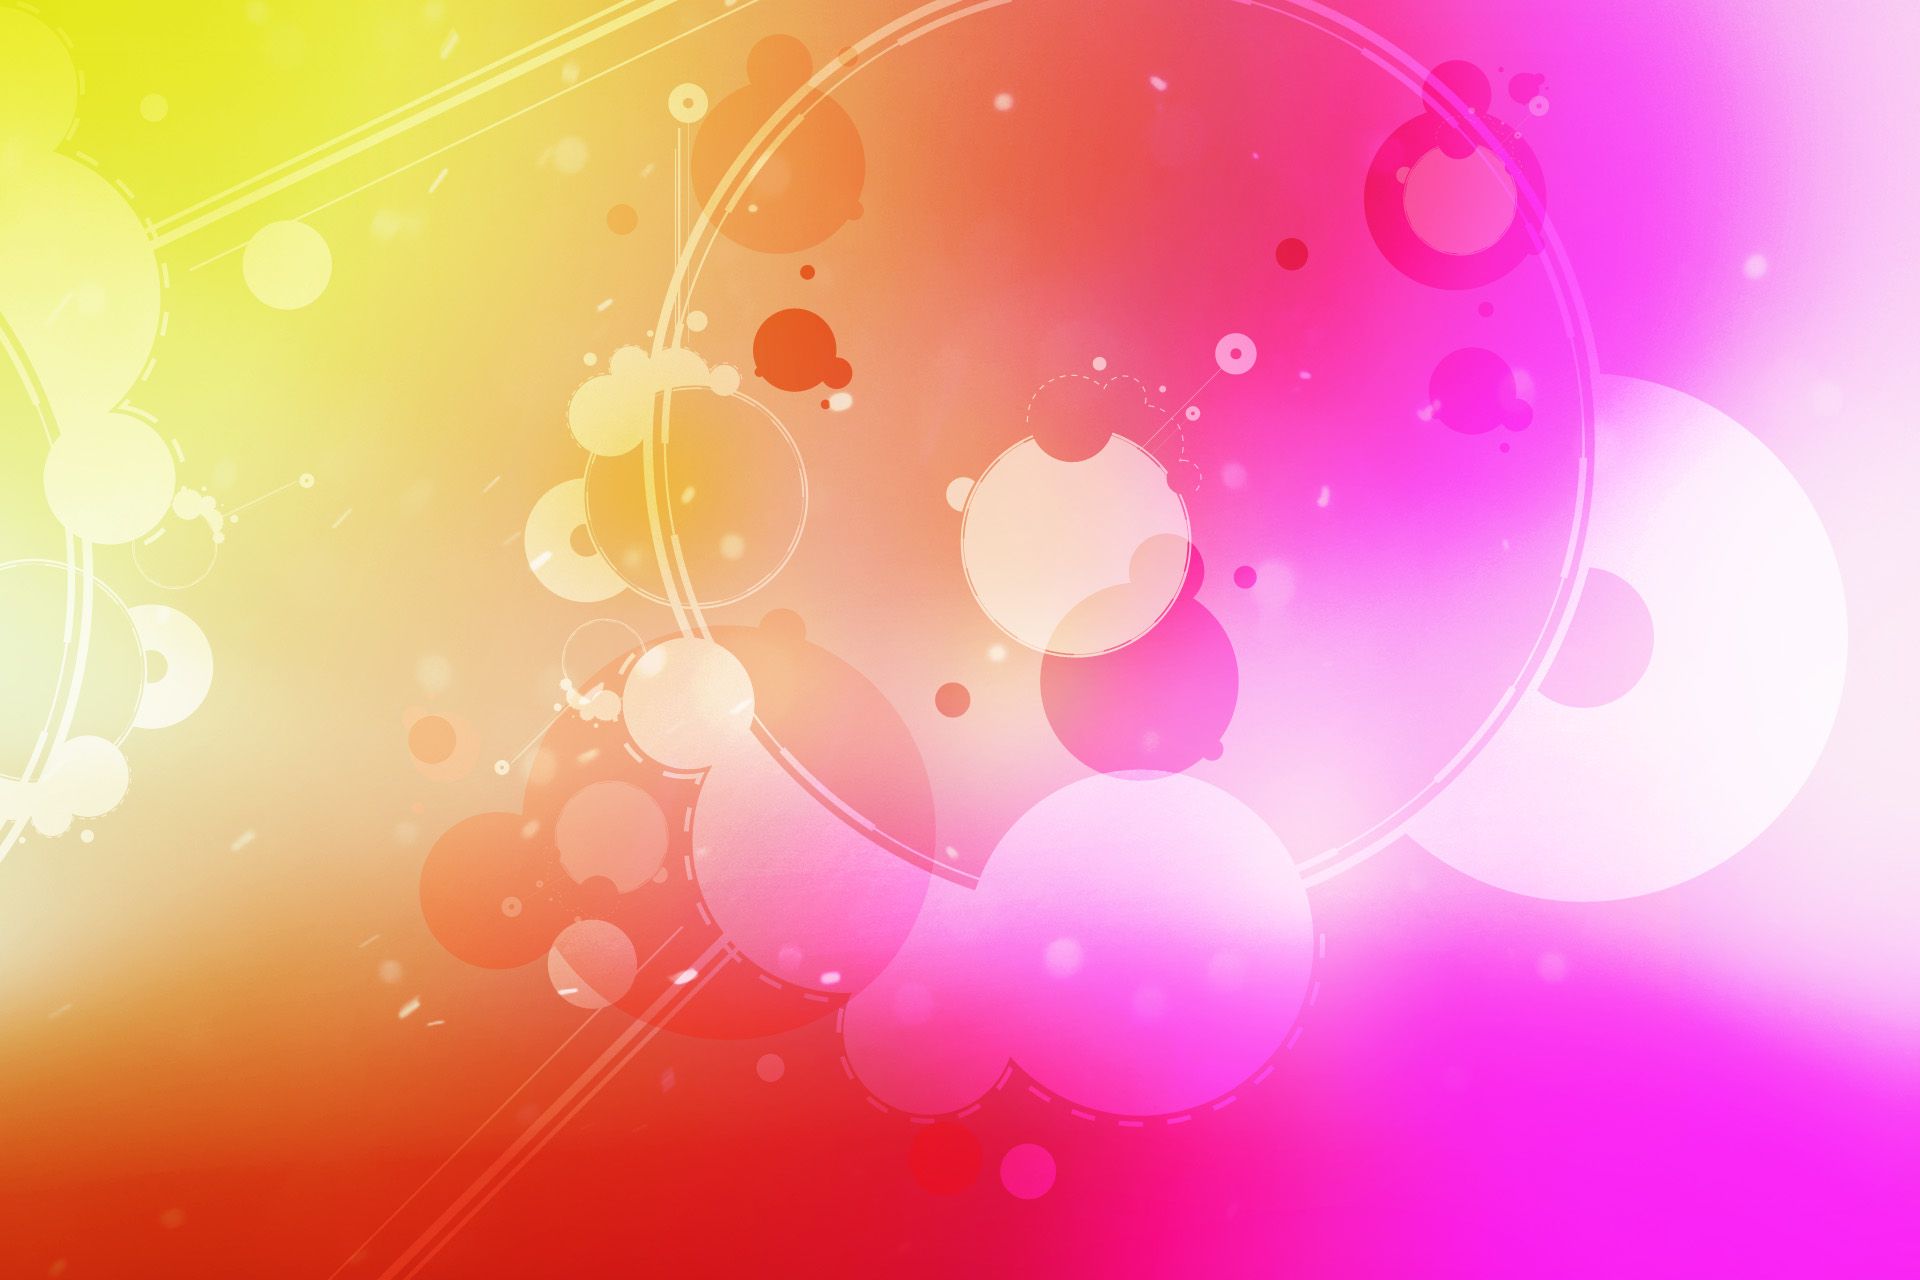 Download New Nexus 7 And Android 4.3 Wallpapers. [HD] | AxeeTech